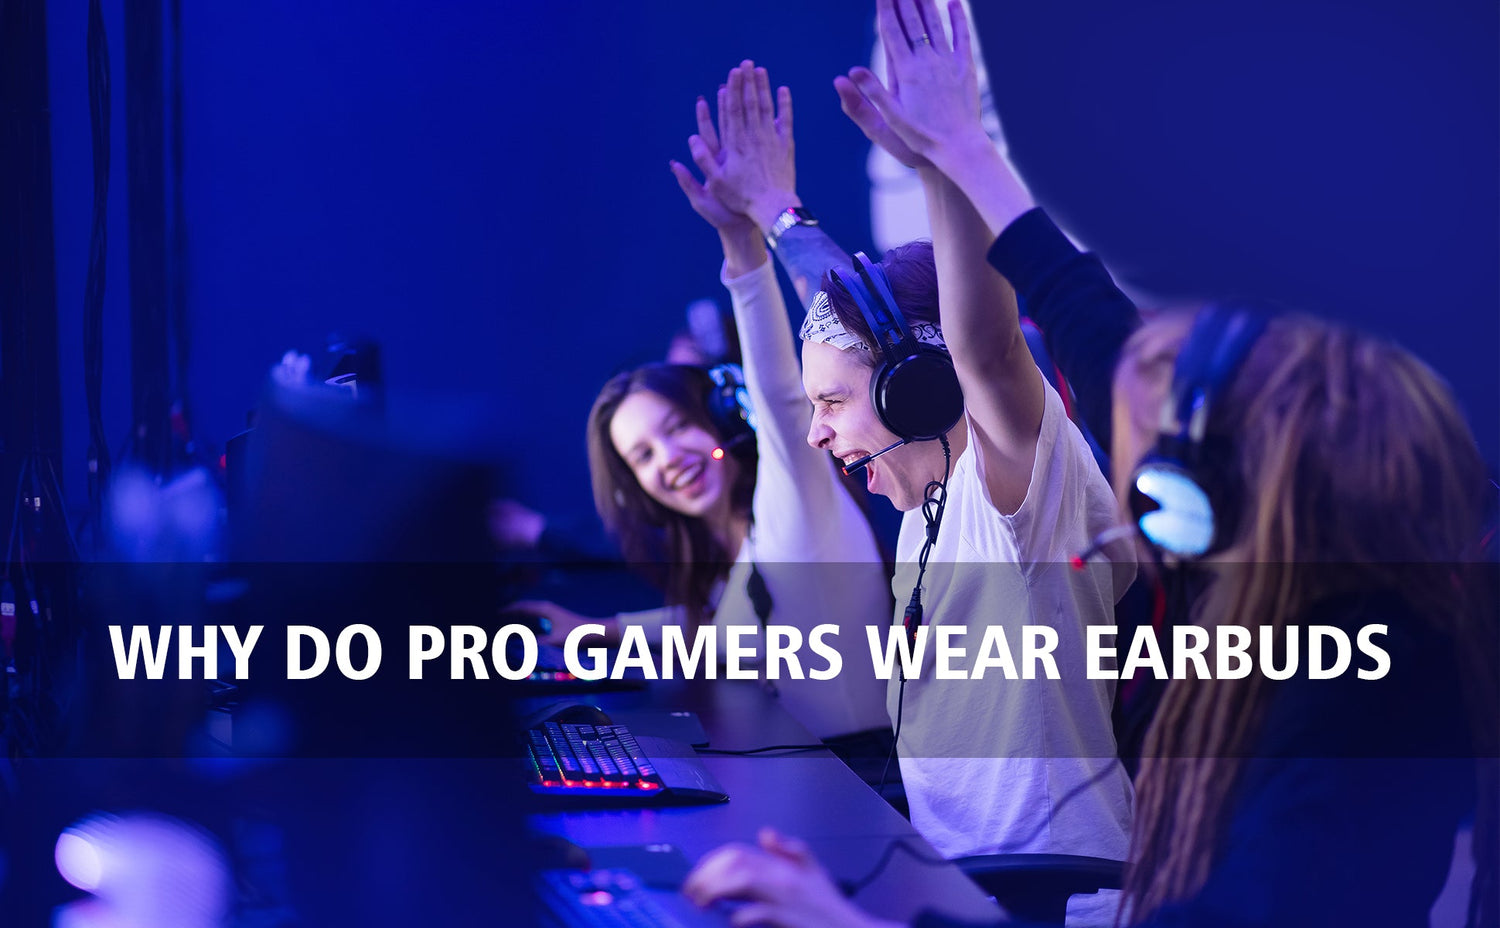 Why Do Pro Gamers Wear Earbuds?